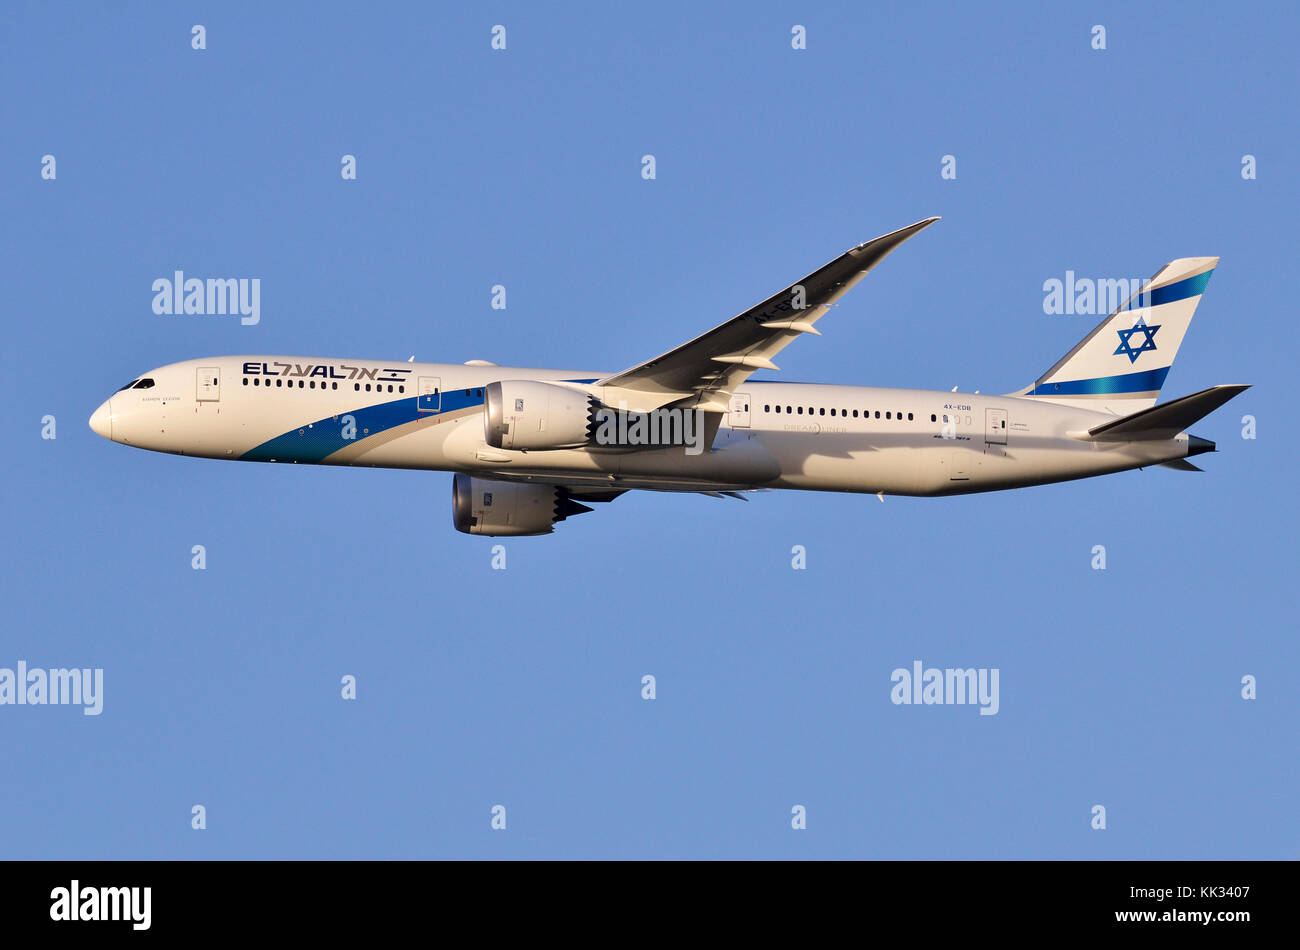 Dreamliner Boeing 787-9, El Al Israel Airlines, climbing out from London Heathrow Airport, UK. Stock Photo